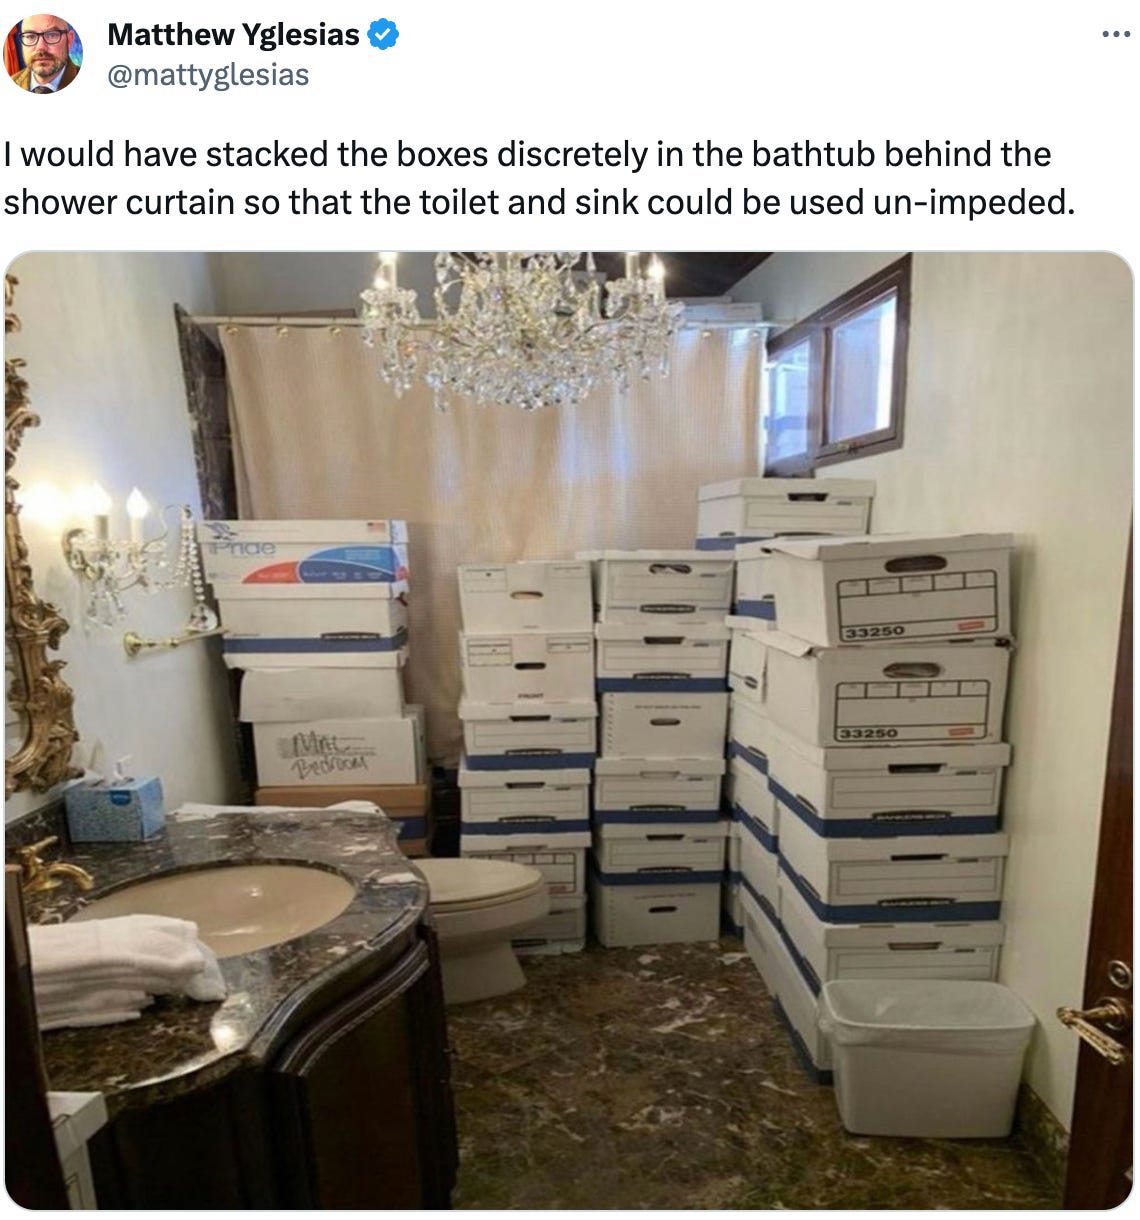  Matthew Yglesias @mattyglesias I would have stacked the boxes discretely in the bathtub behind the shower curtain so that the toilet and sink could be used un-impeded.